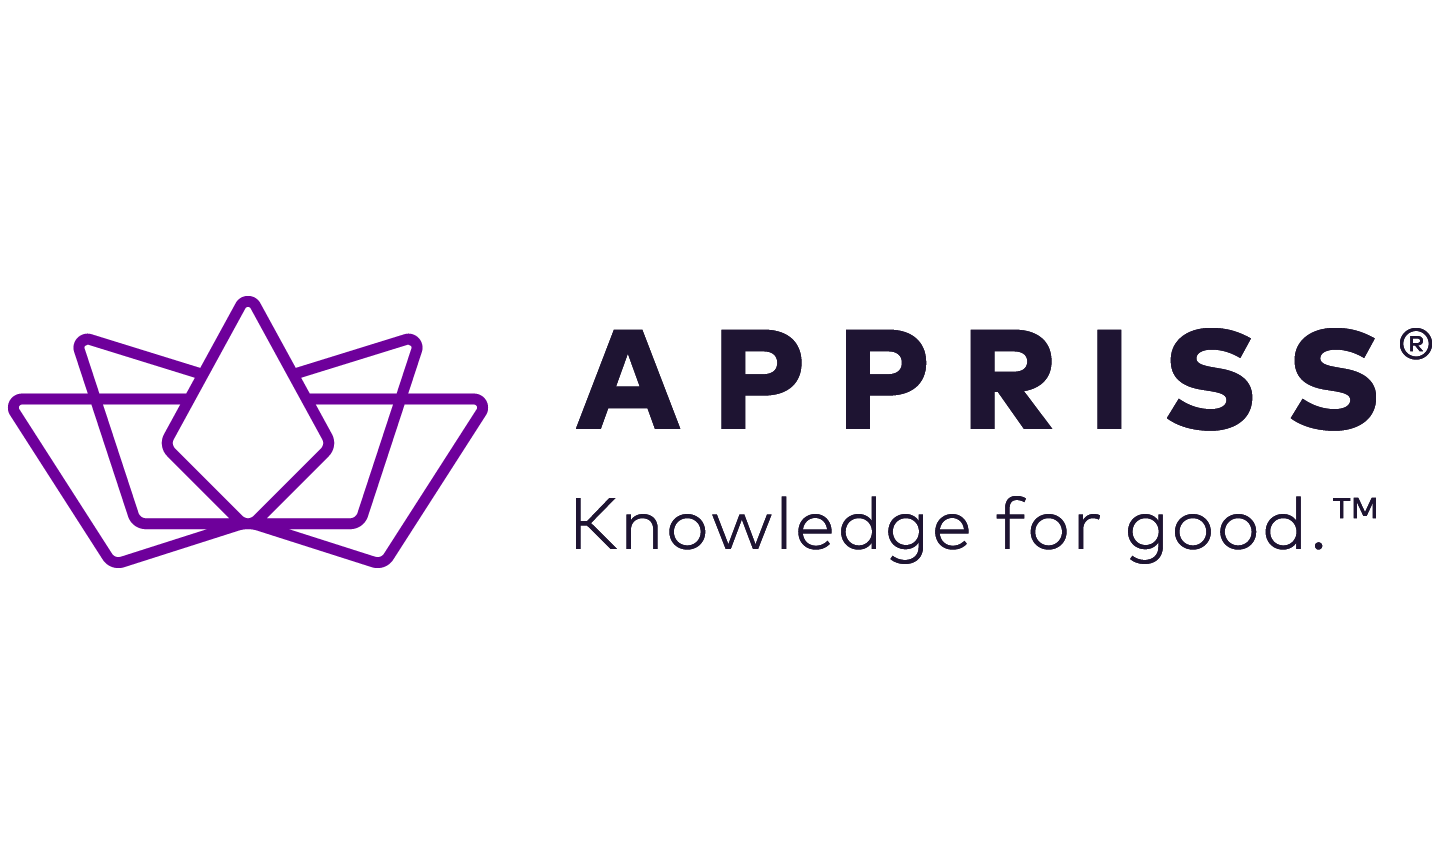 Appriss Logo - Appriss Home is data and analytics, creating knowledge